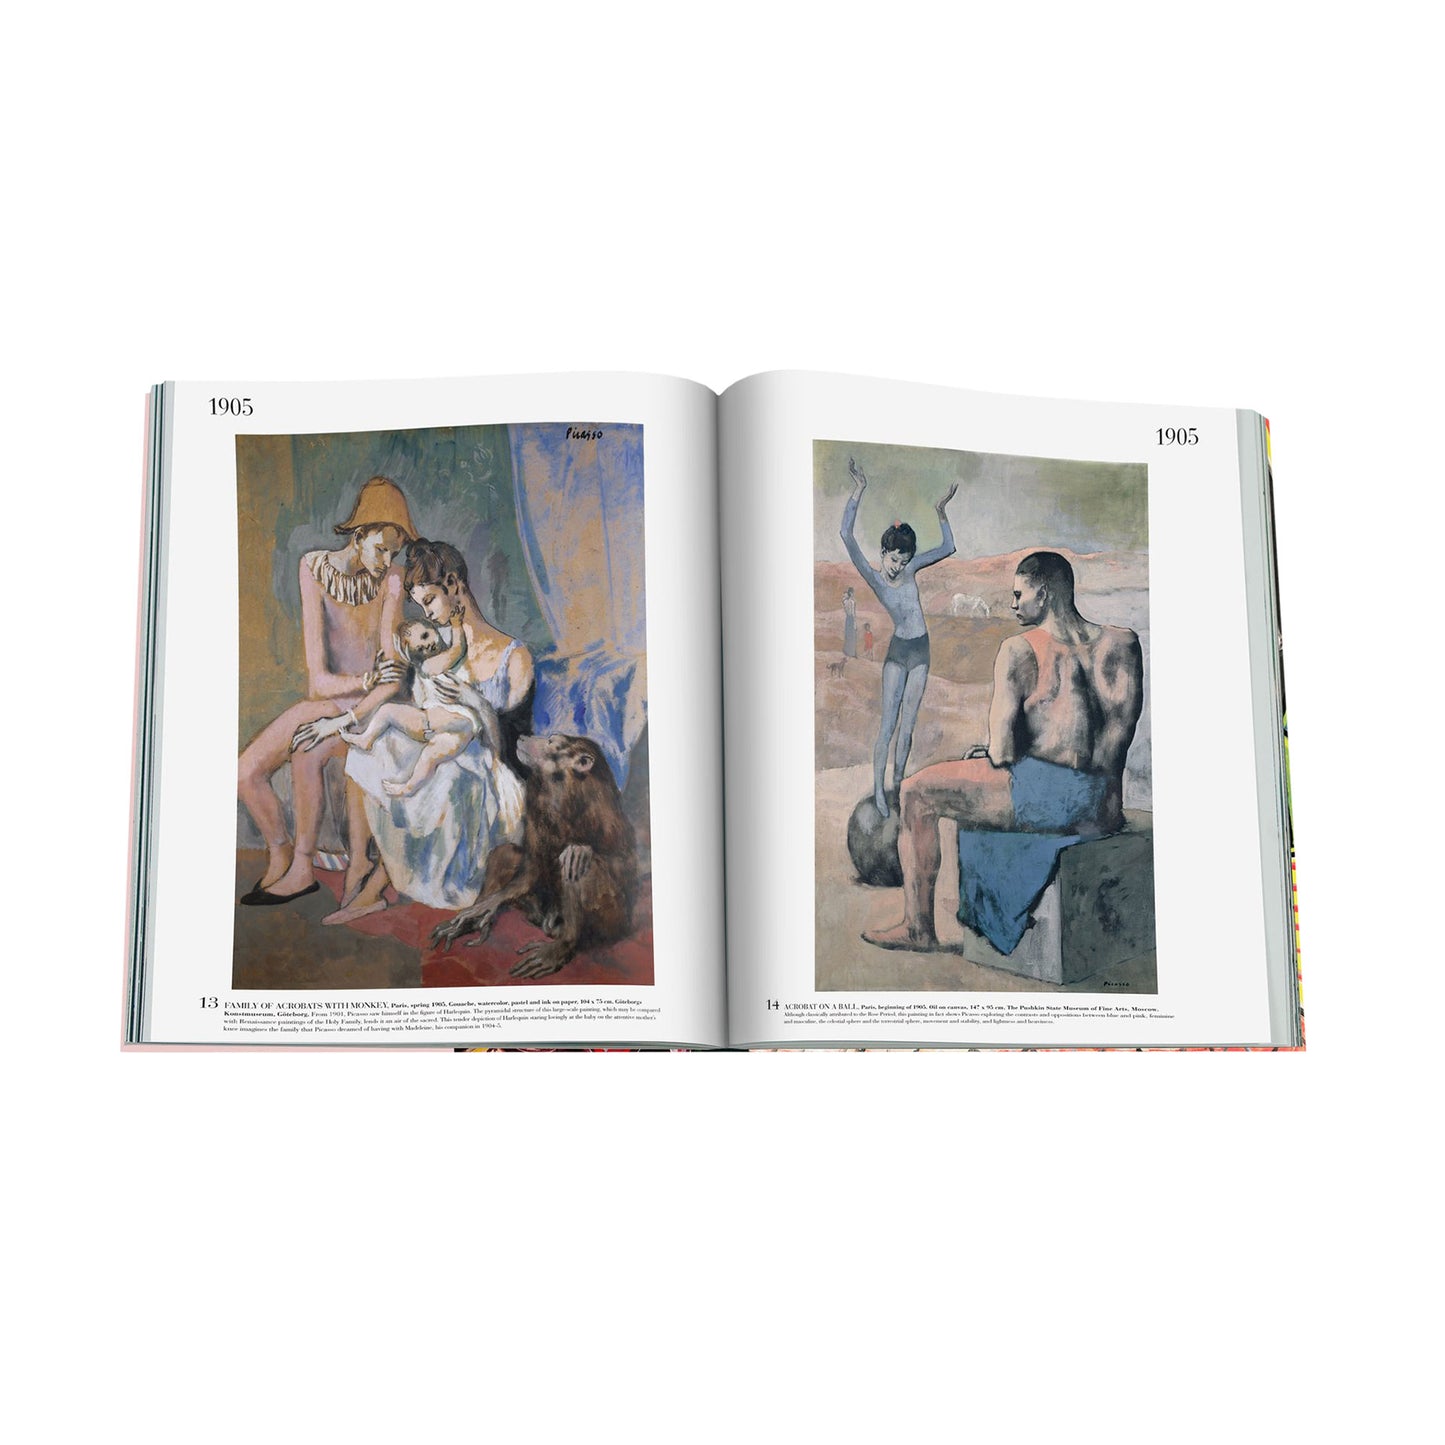 Picasso: The Impossible Collection